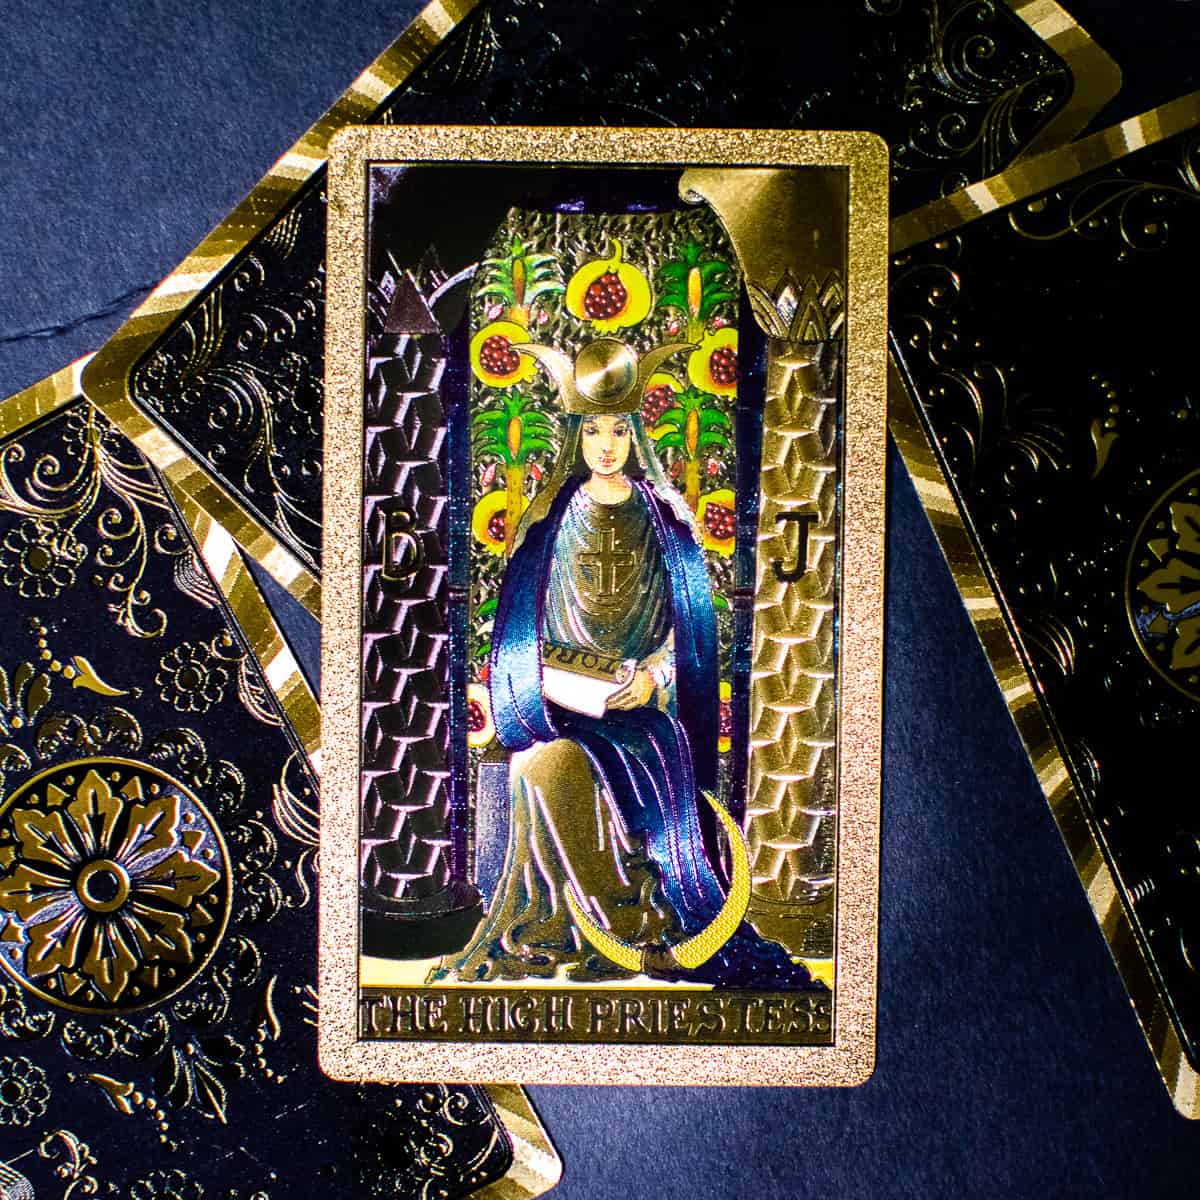 The High Priestess sitting between two pillars depicted on a tarot card. 